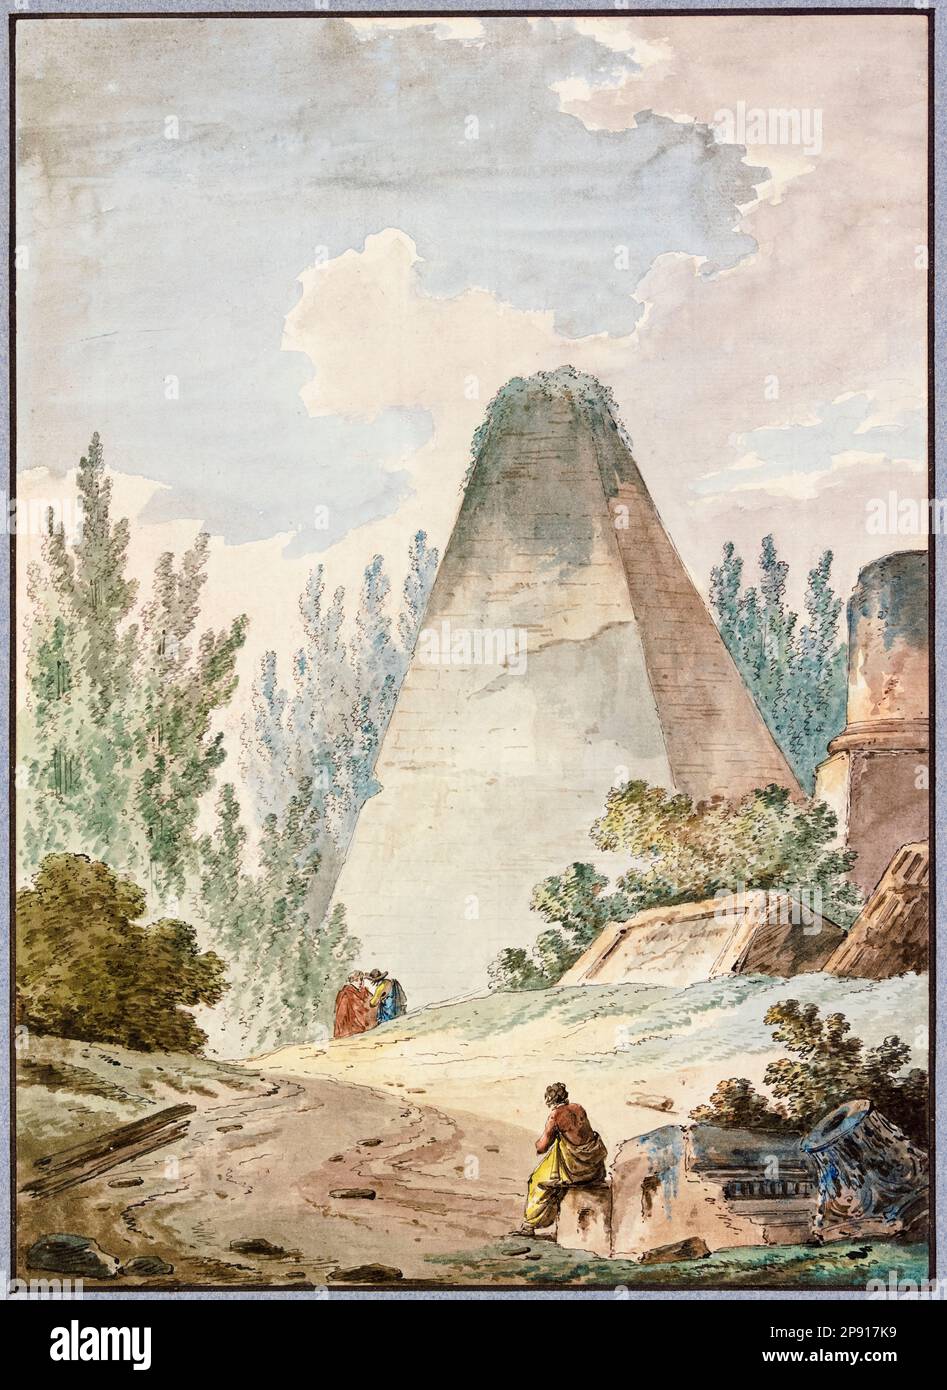 Pyramid with a broken top in a landscape of ancient ruins, watercolour painting by Hubert Robert, before 1808 Stock Photo